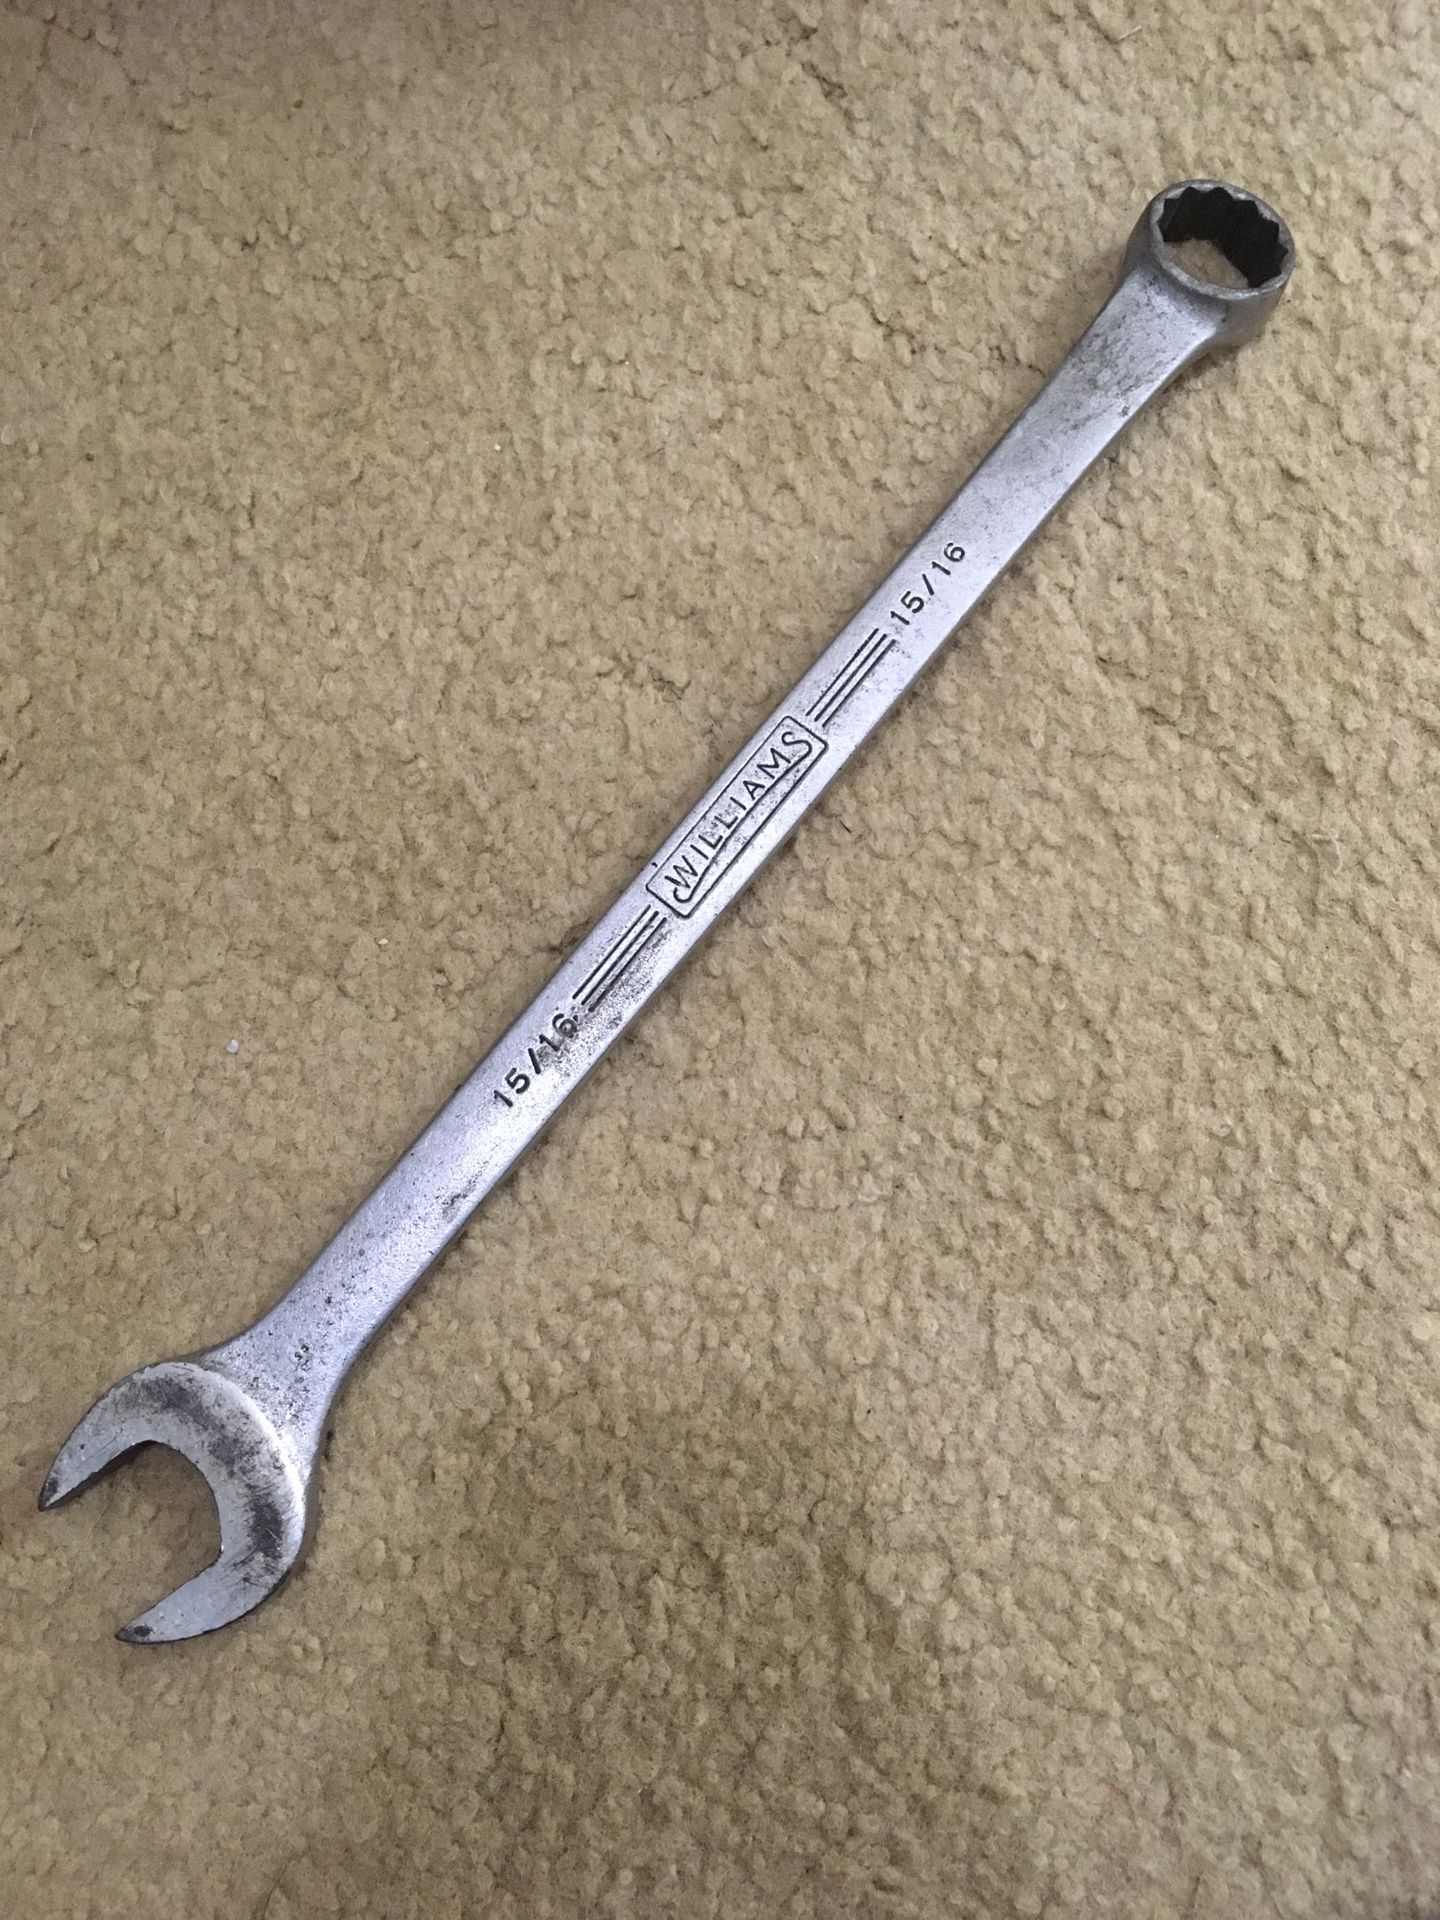 15/16” wrench Williams